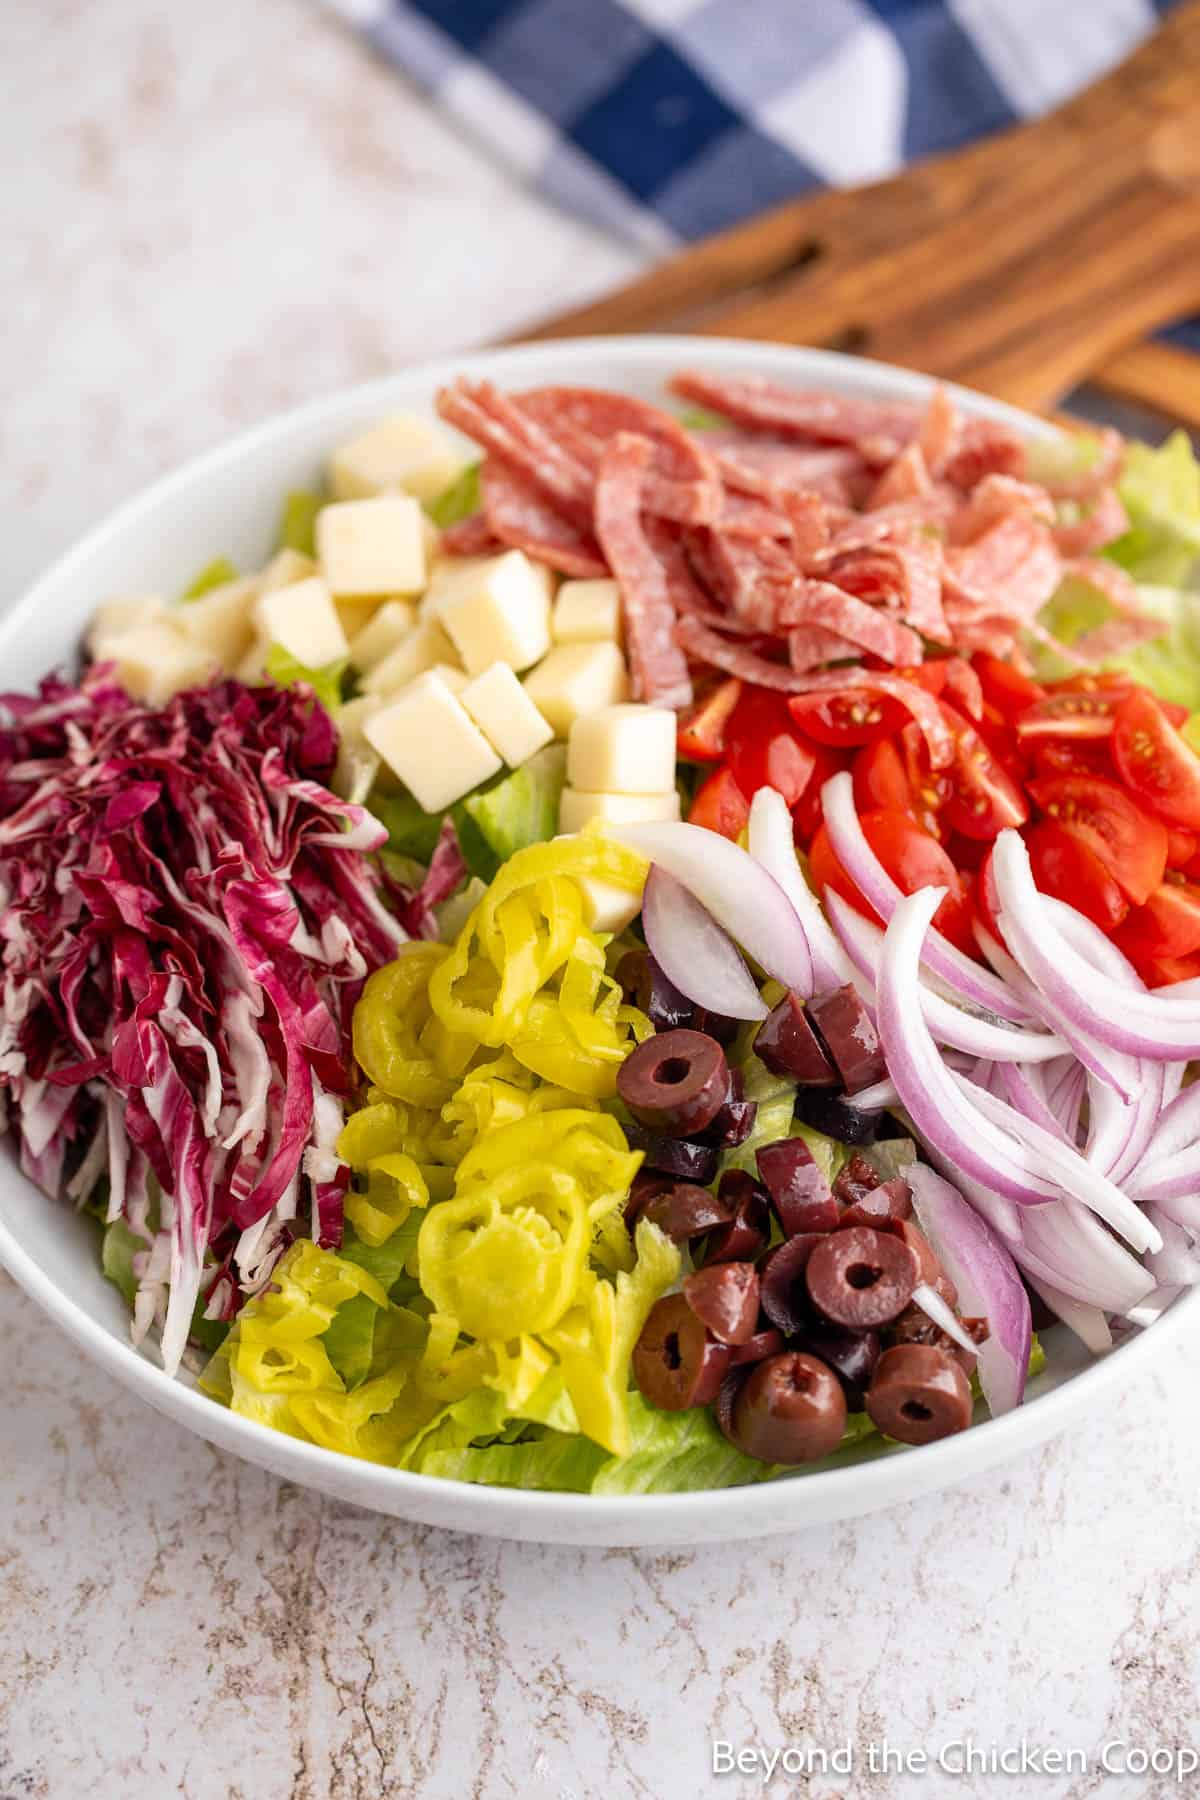 Salad ingredients organized in a bowl. 